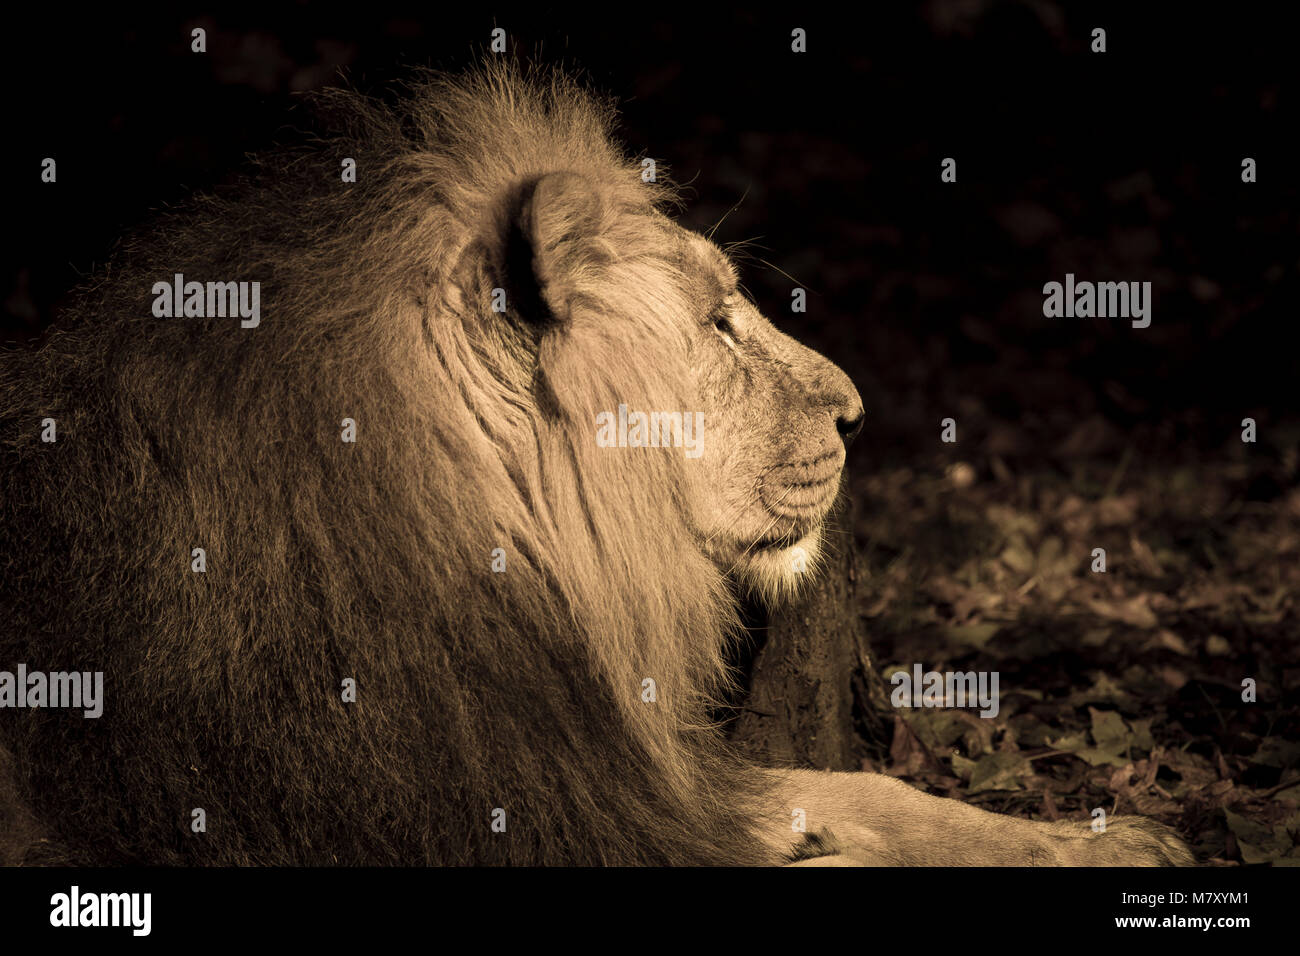 Close up profile of captive lion at Chester zoo while resting with blurred background Stock Photo